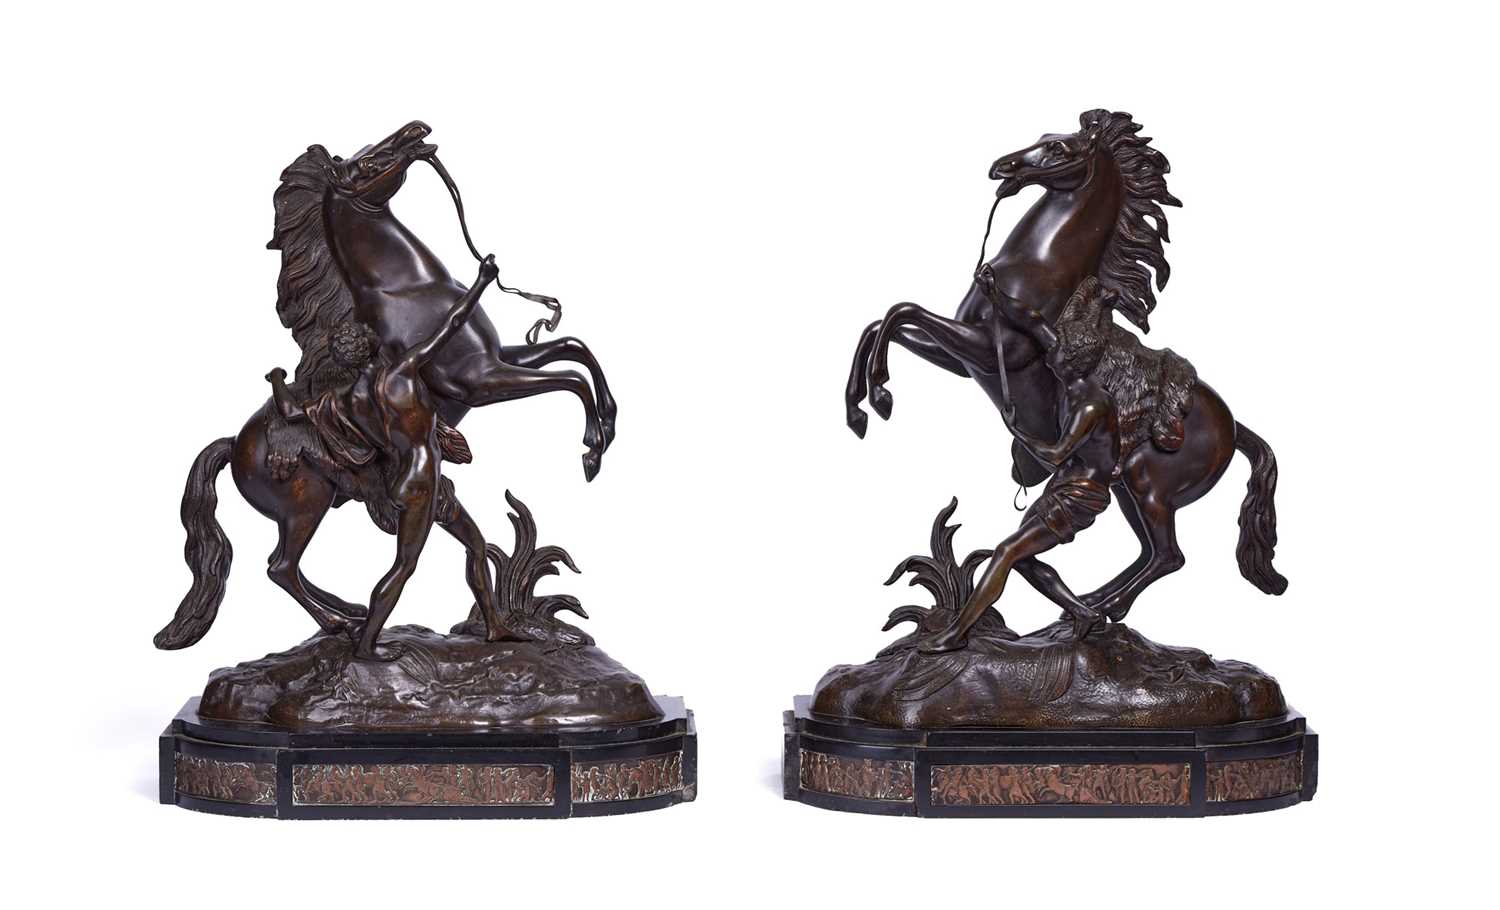 A PAIR OF 19TH CENTURY BRONZE MODELS OF THE MARLEY HORSES AFTER COUSTOU (FRENCH, 1677-1746)